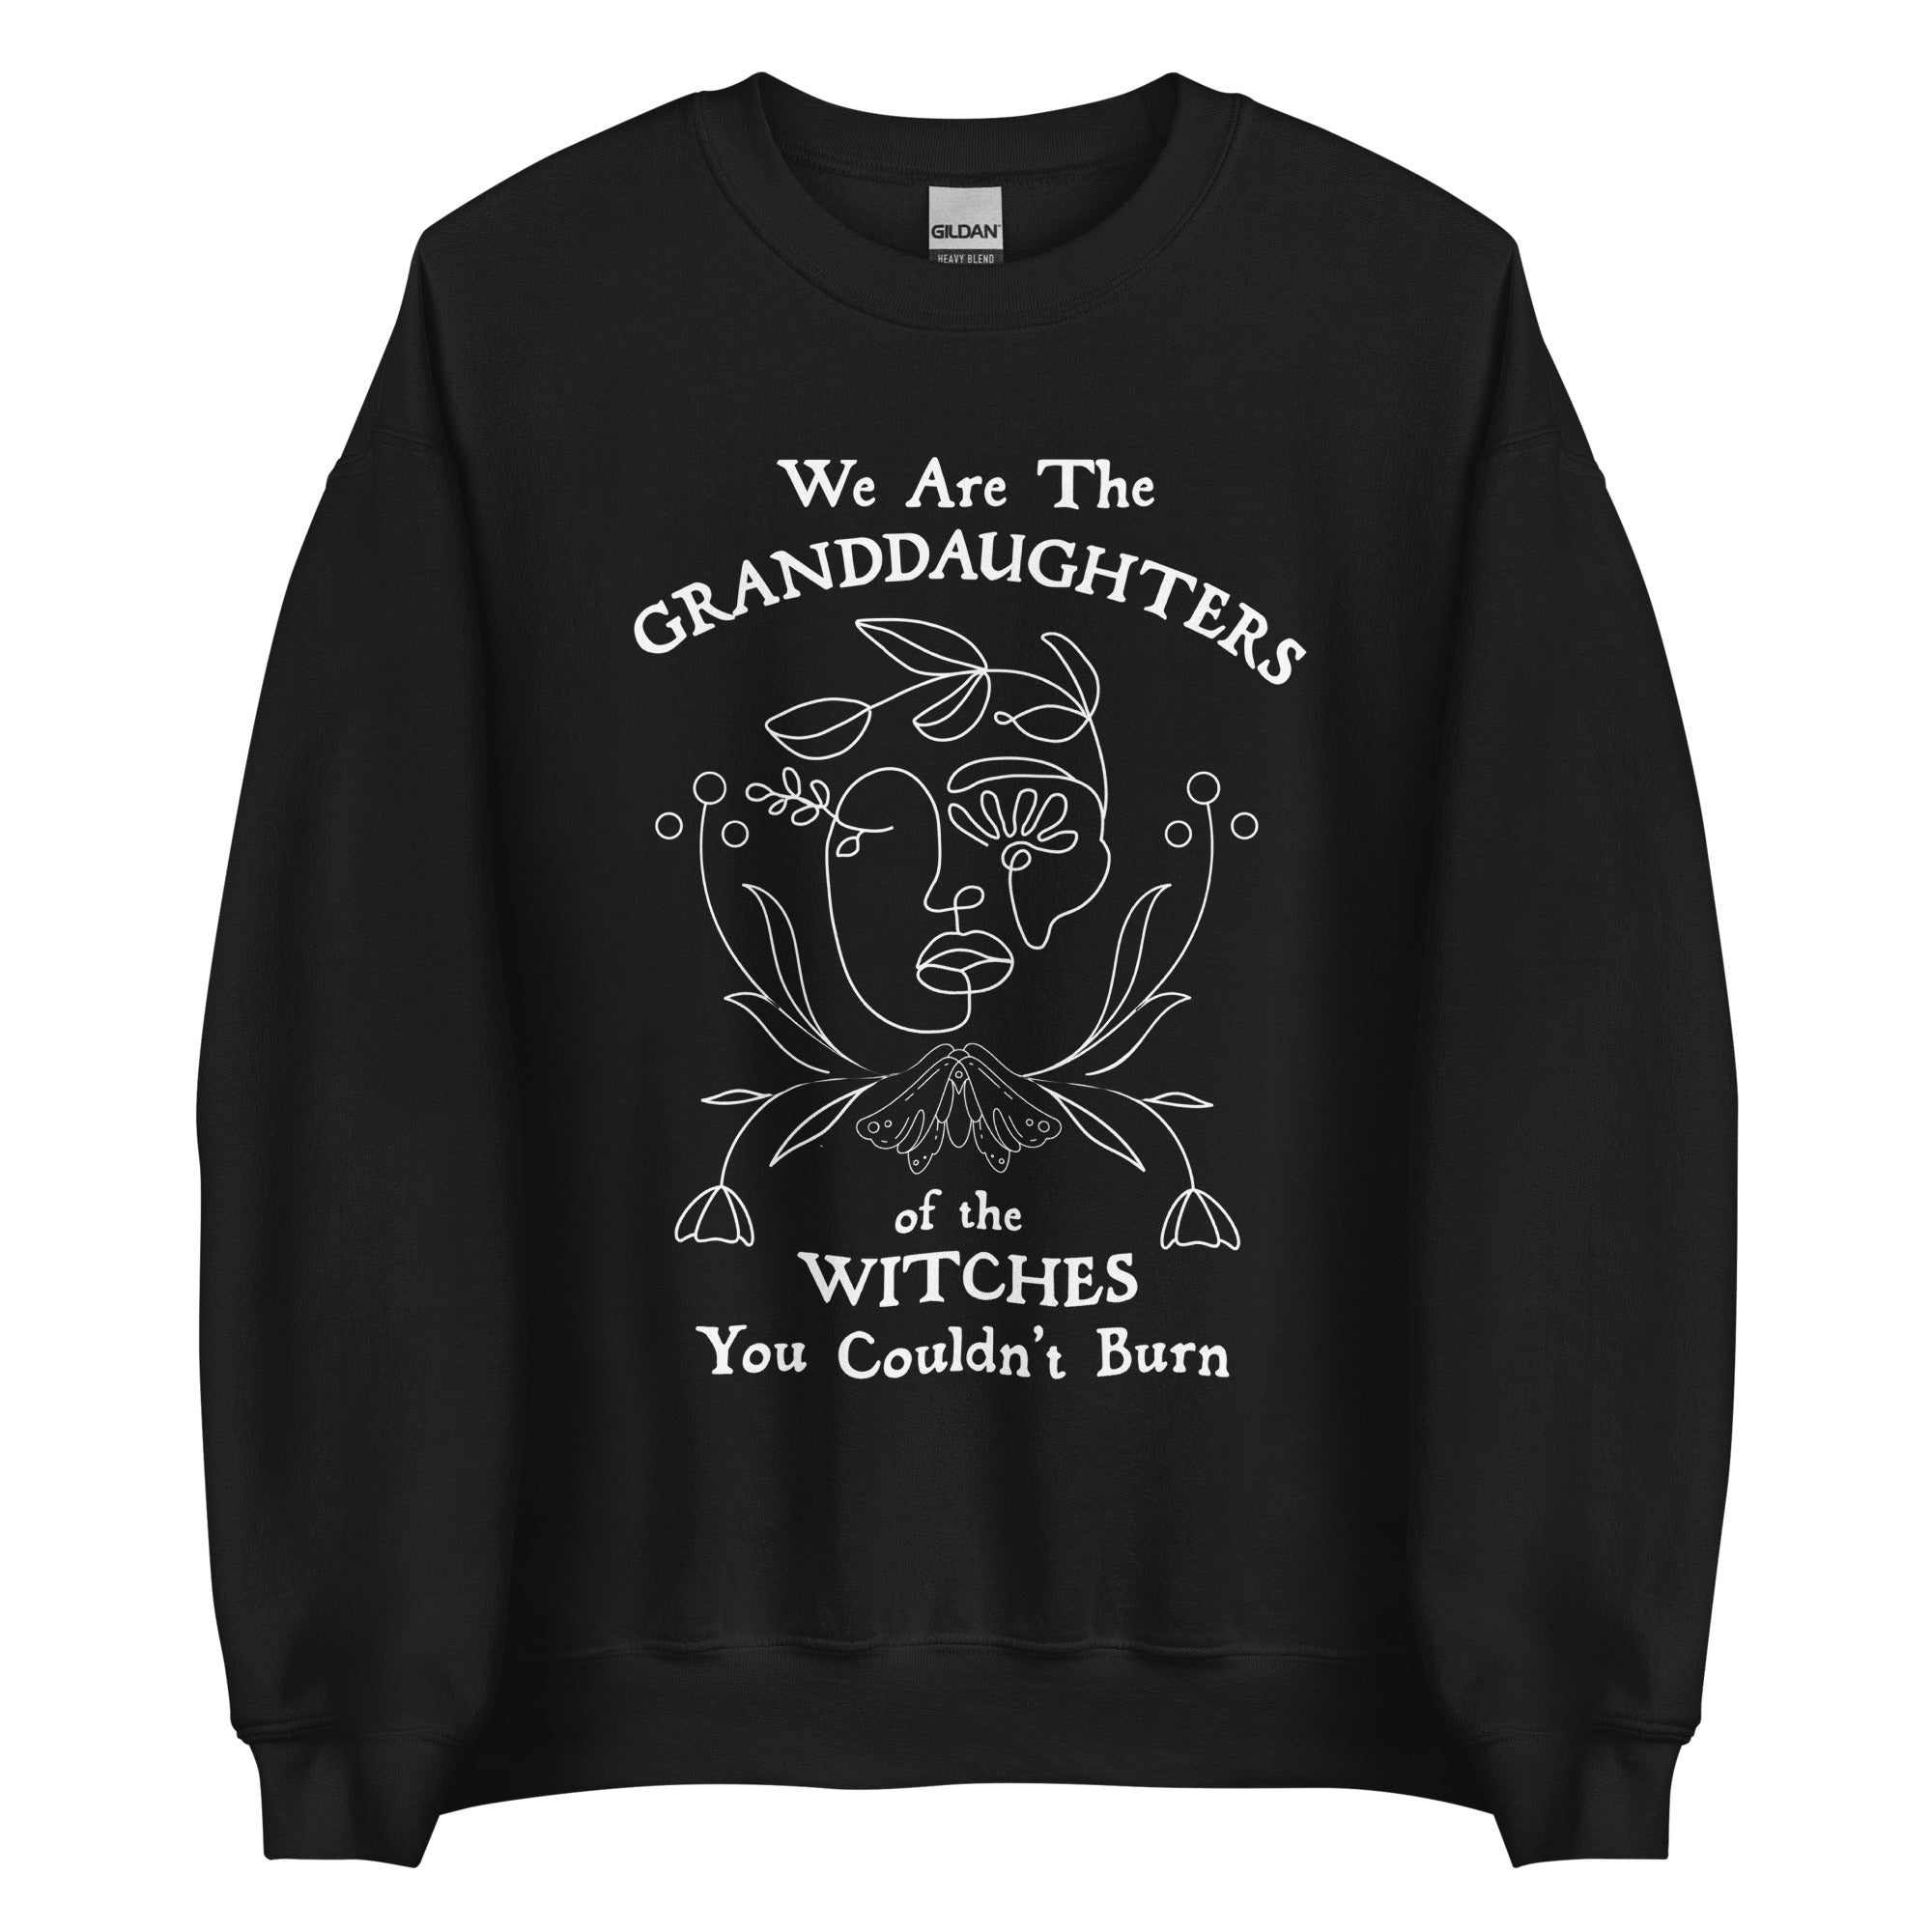 We Are The Granddaughters Crewneck